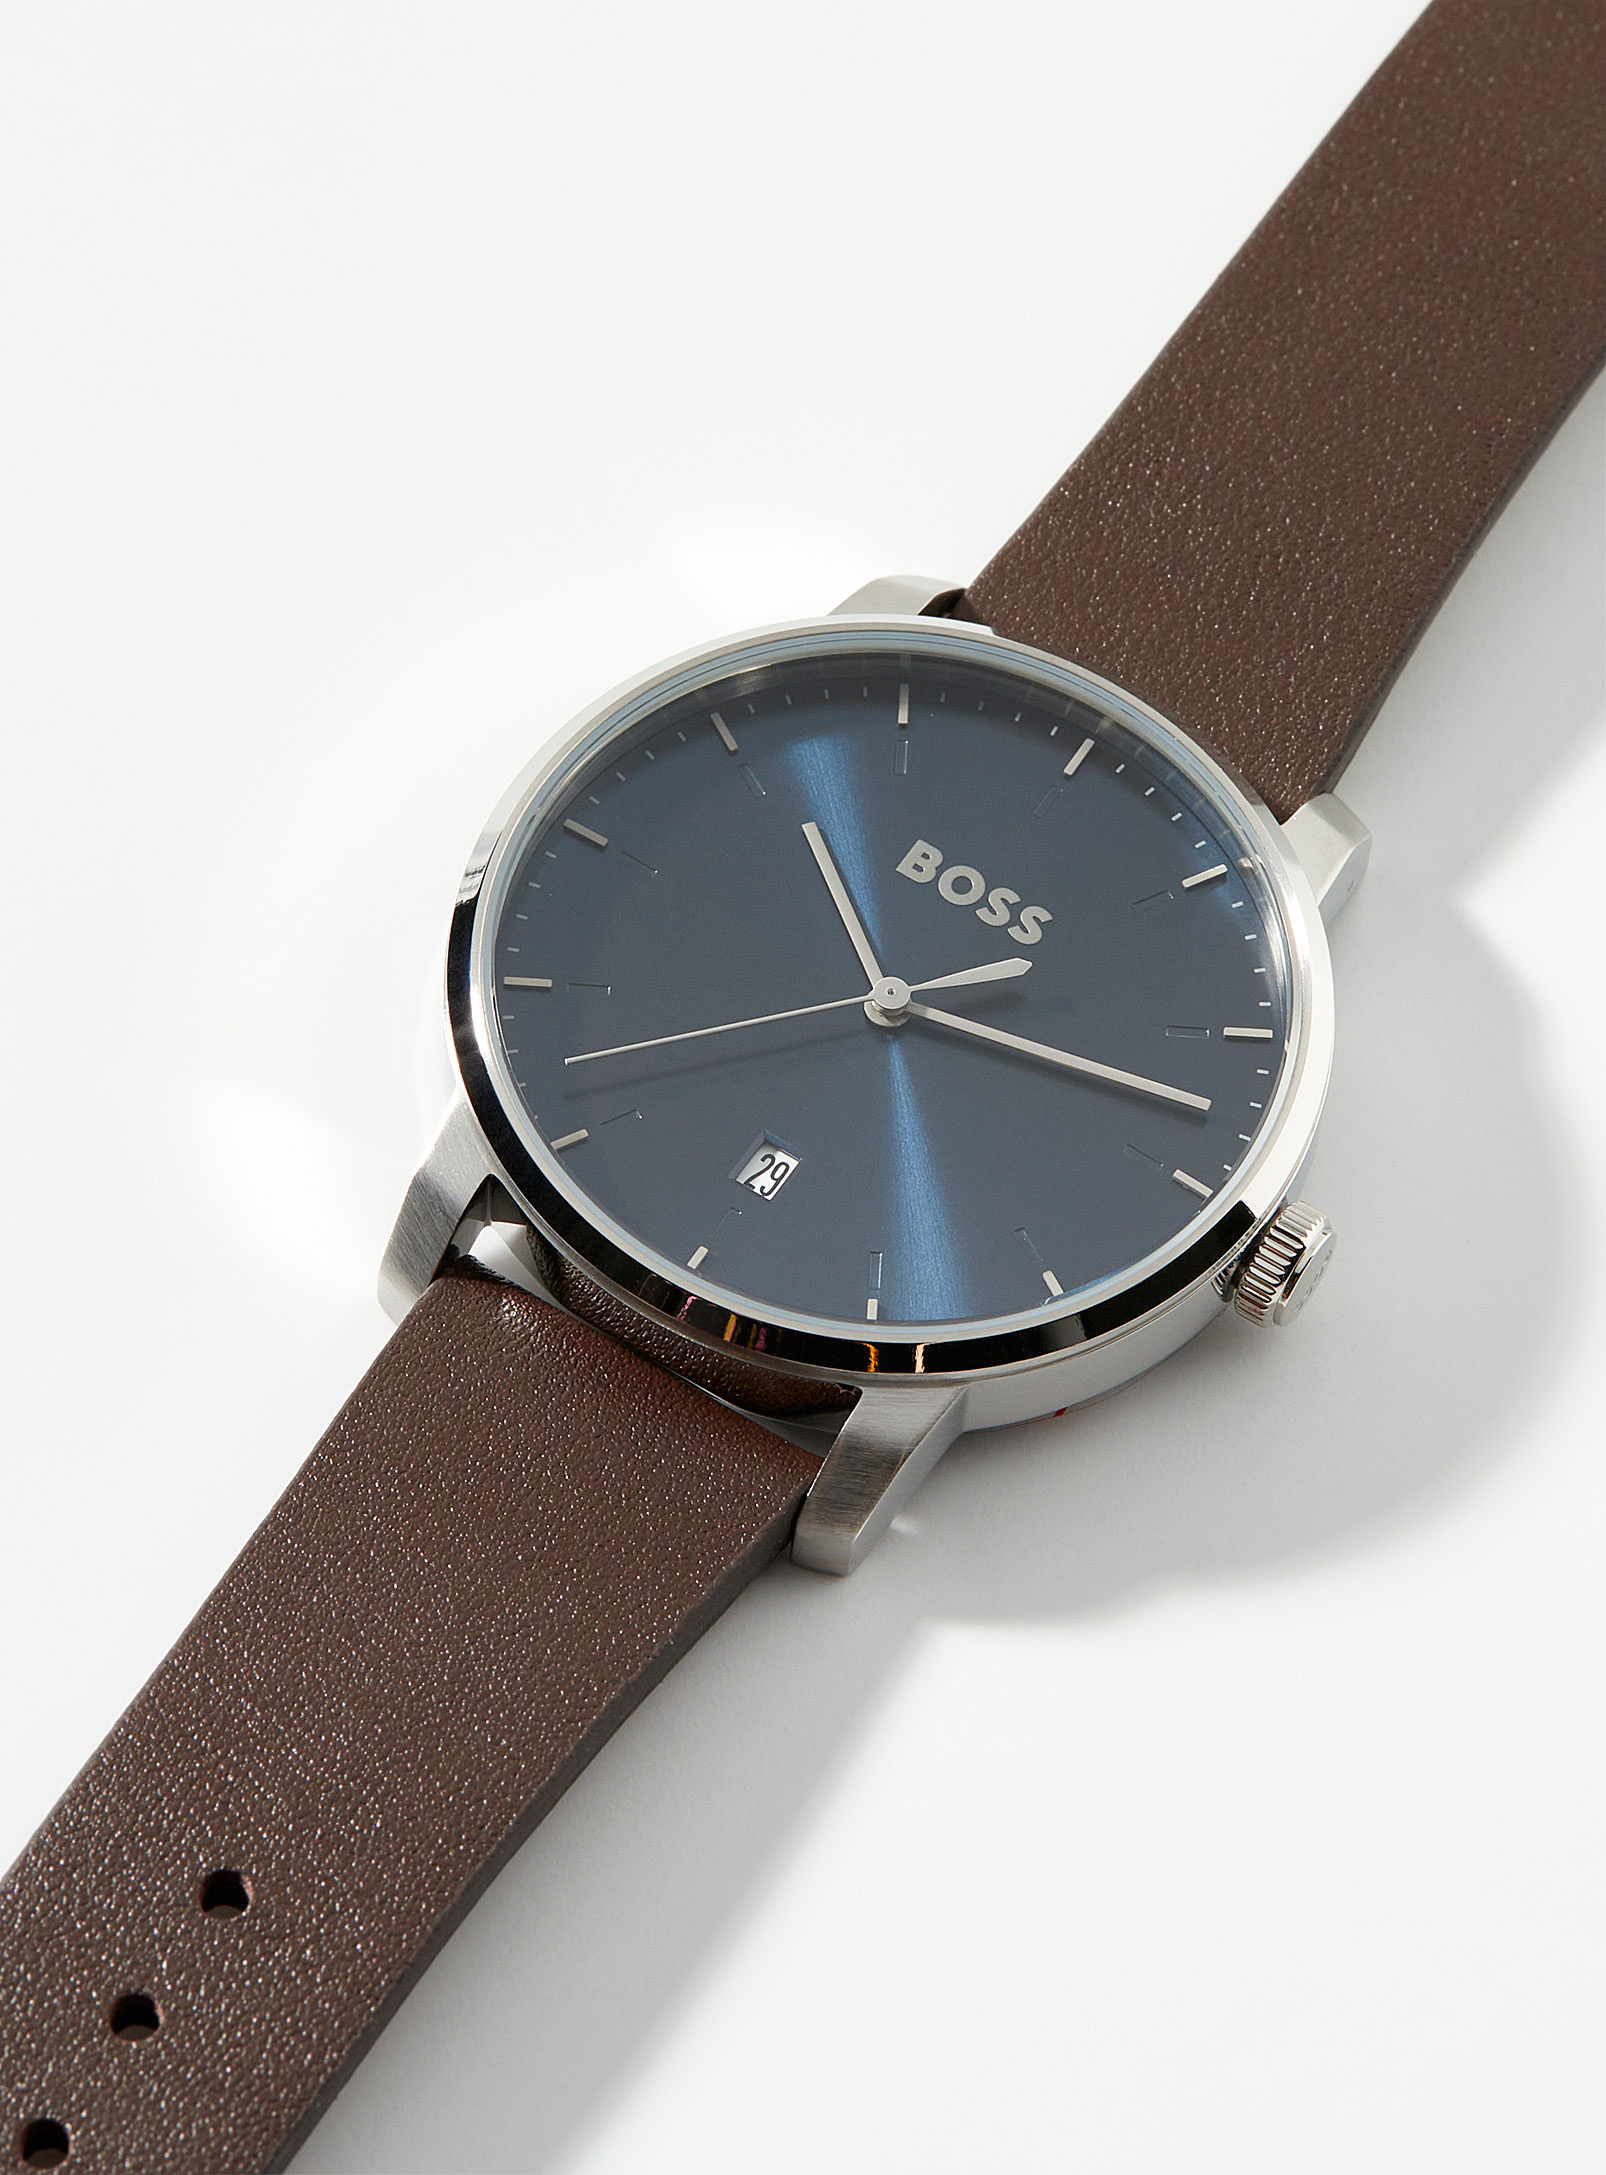 BOSS - Men's Navy-blue-dial leather band watch